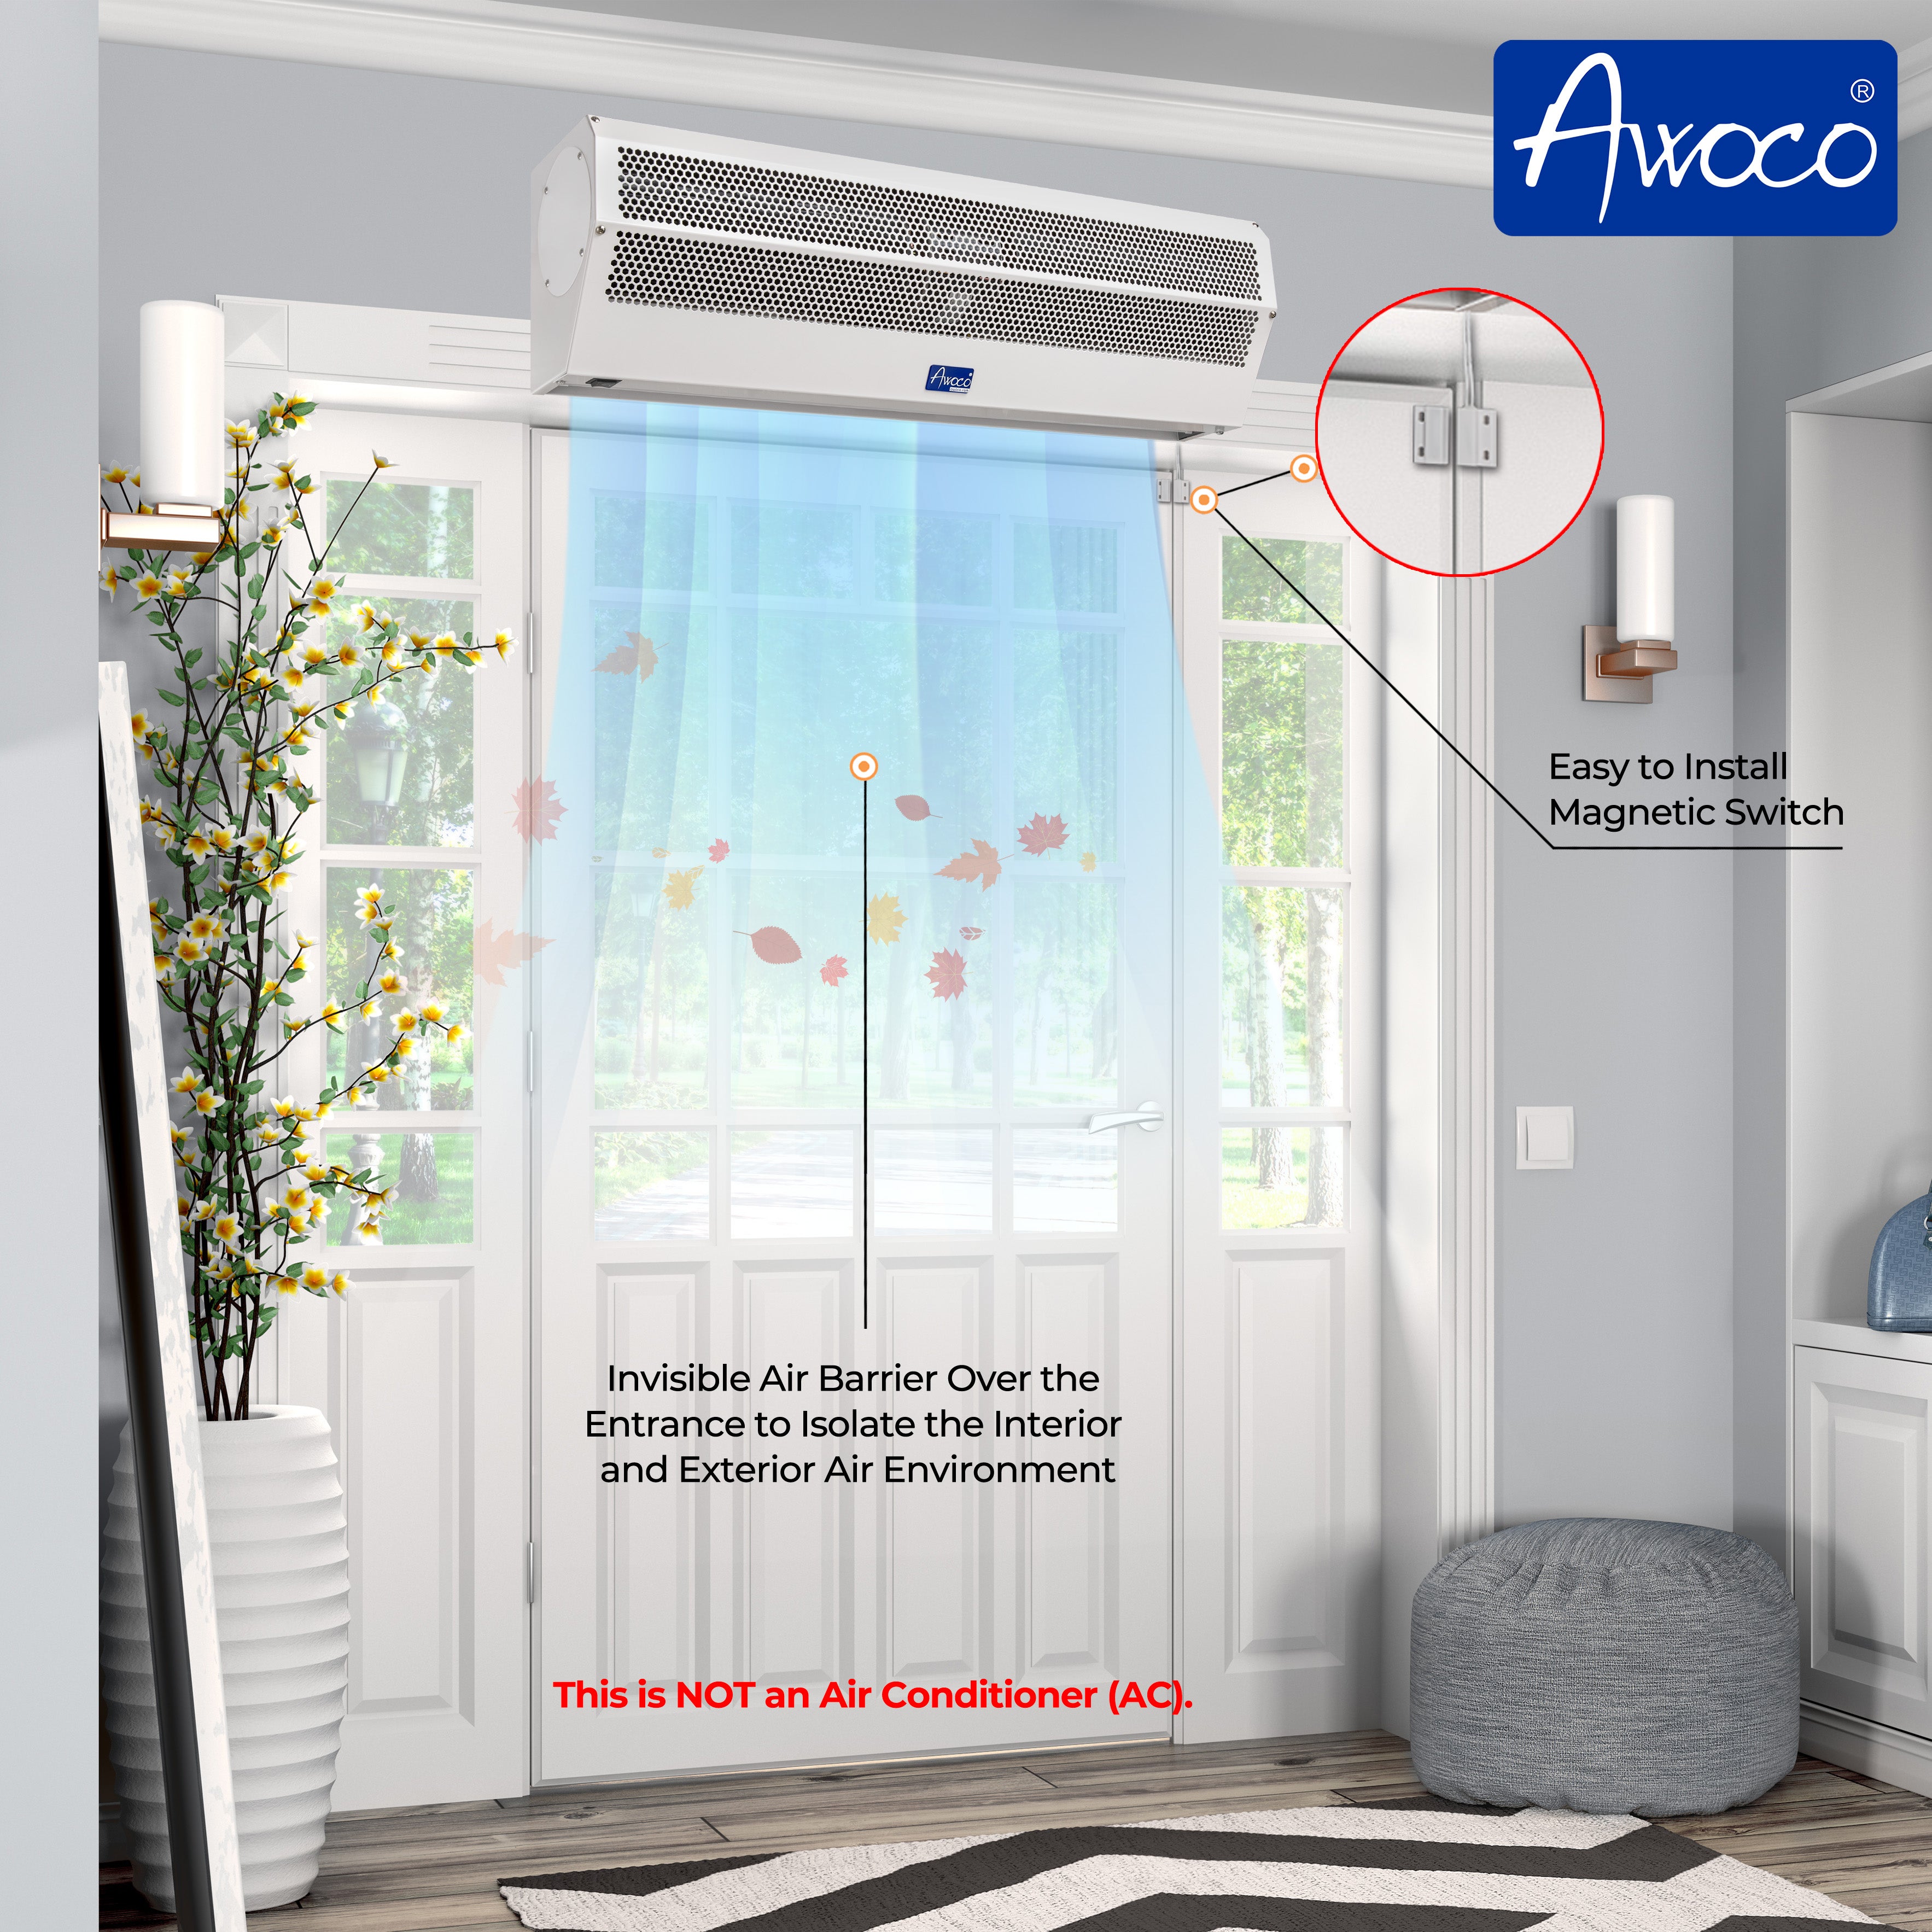 Awoco 60” Super Power 2 Speeds 2100 CFM Commercial Indoor Air Curtain, UL Certified, 120V Unheated with Shutoff Delay Magnetic Switch for Swinging Doors